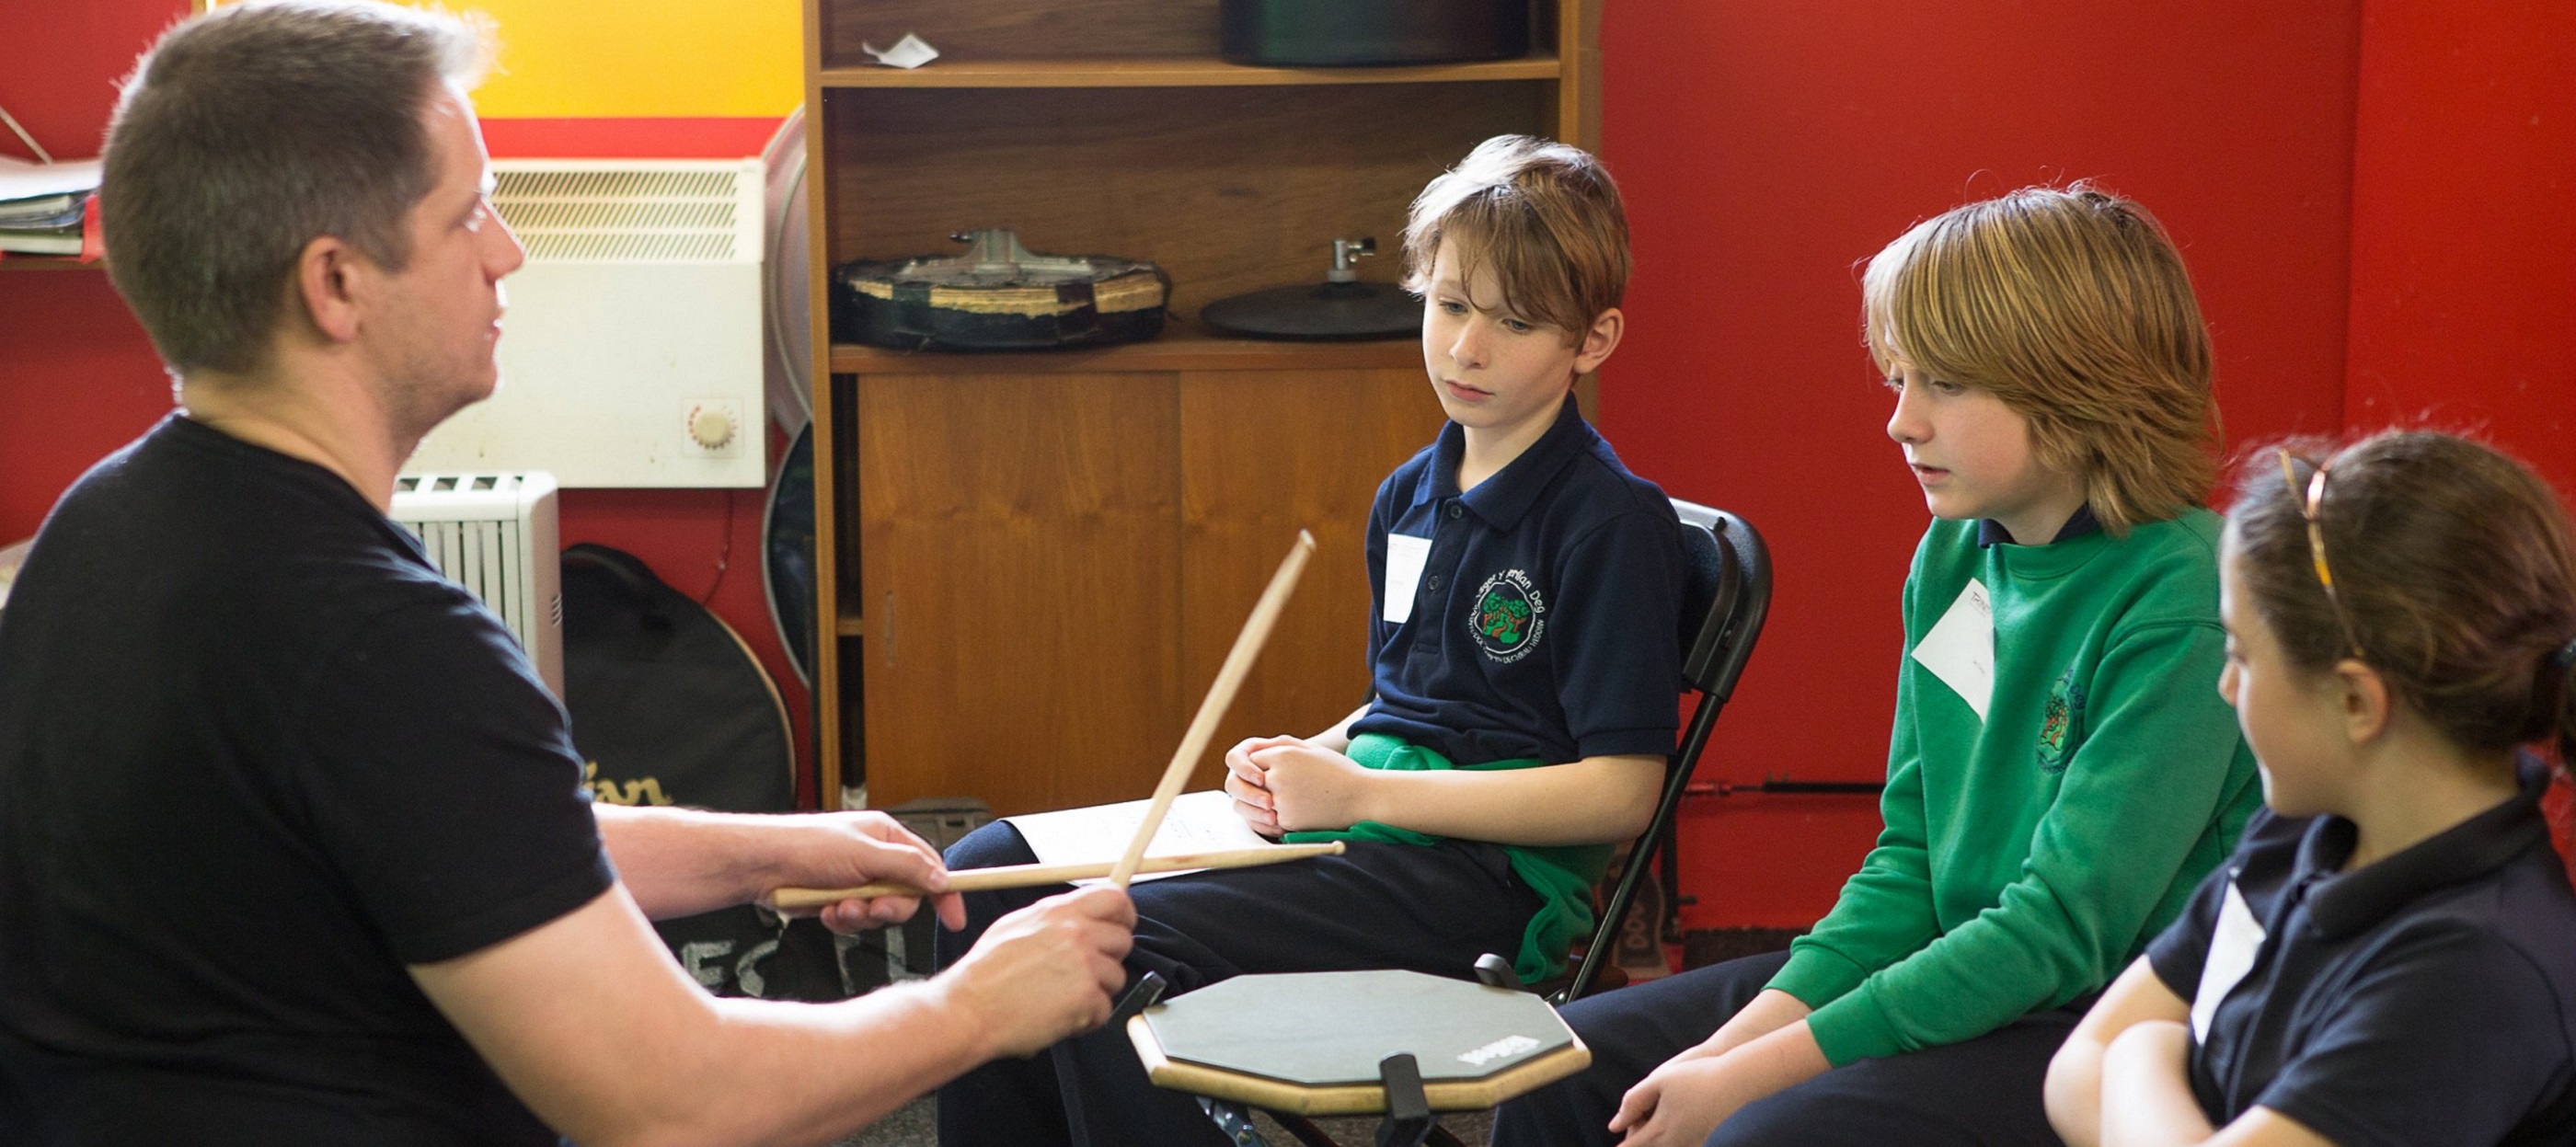 Drum teacher with small group of primary aged students